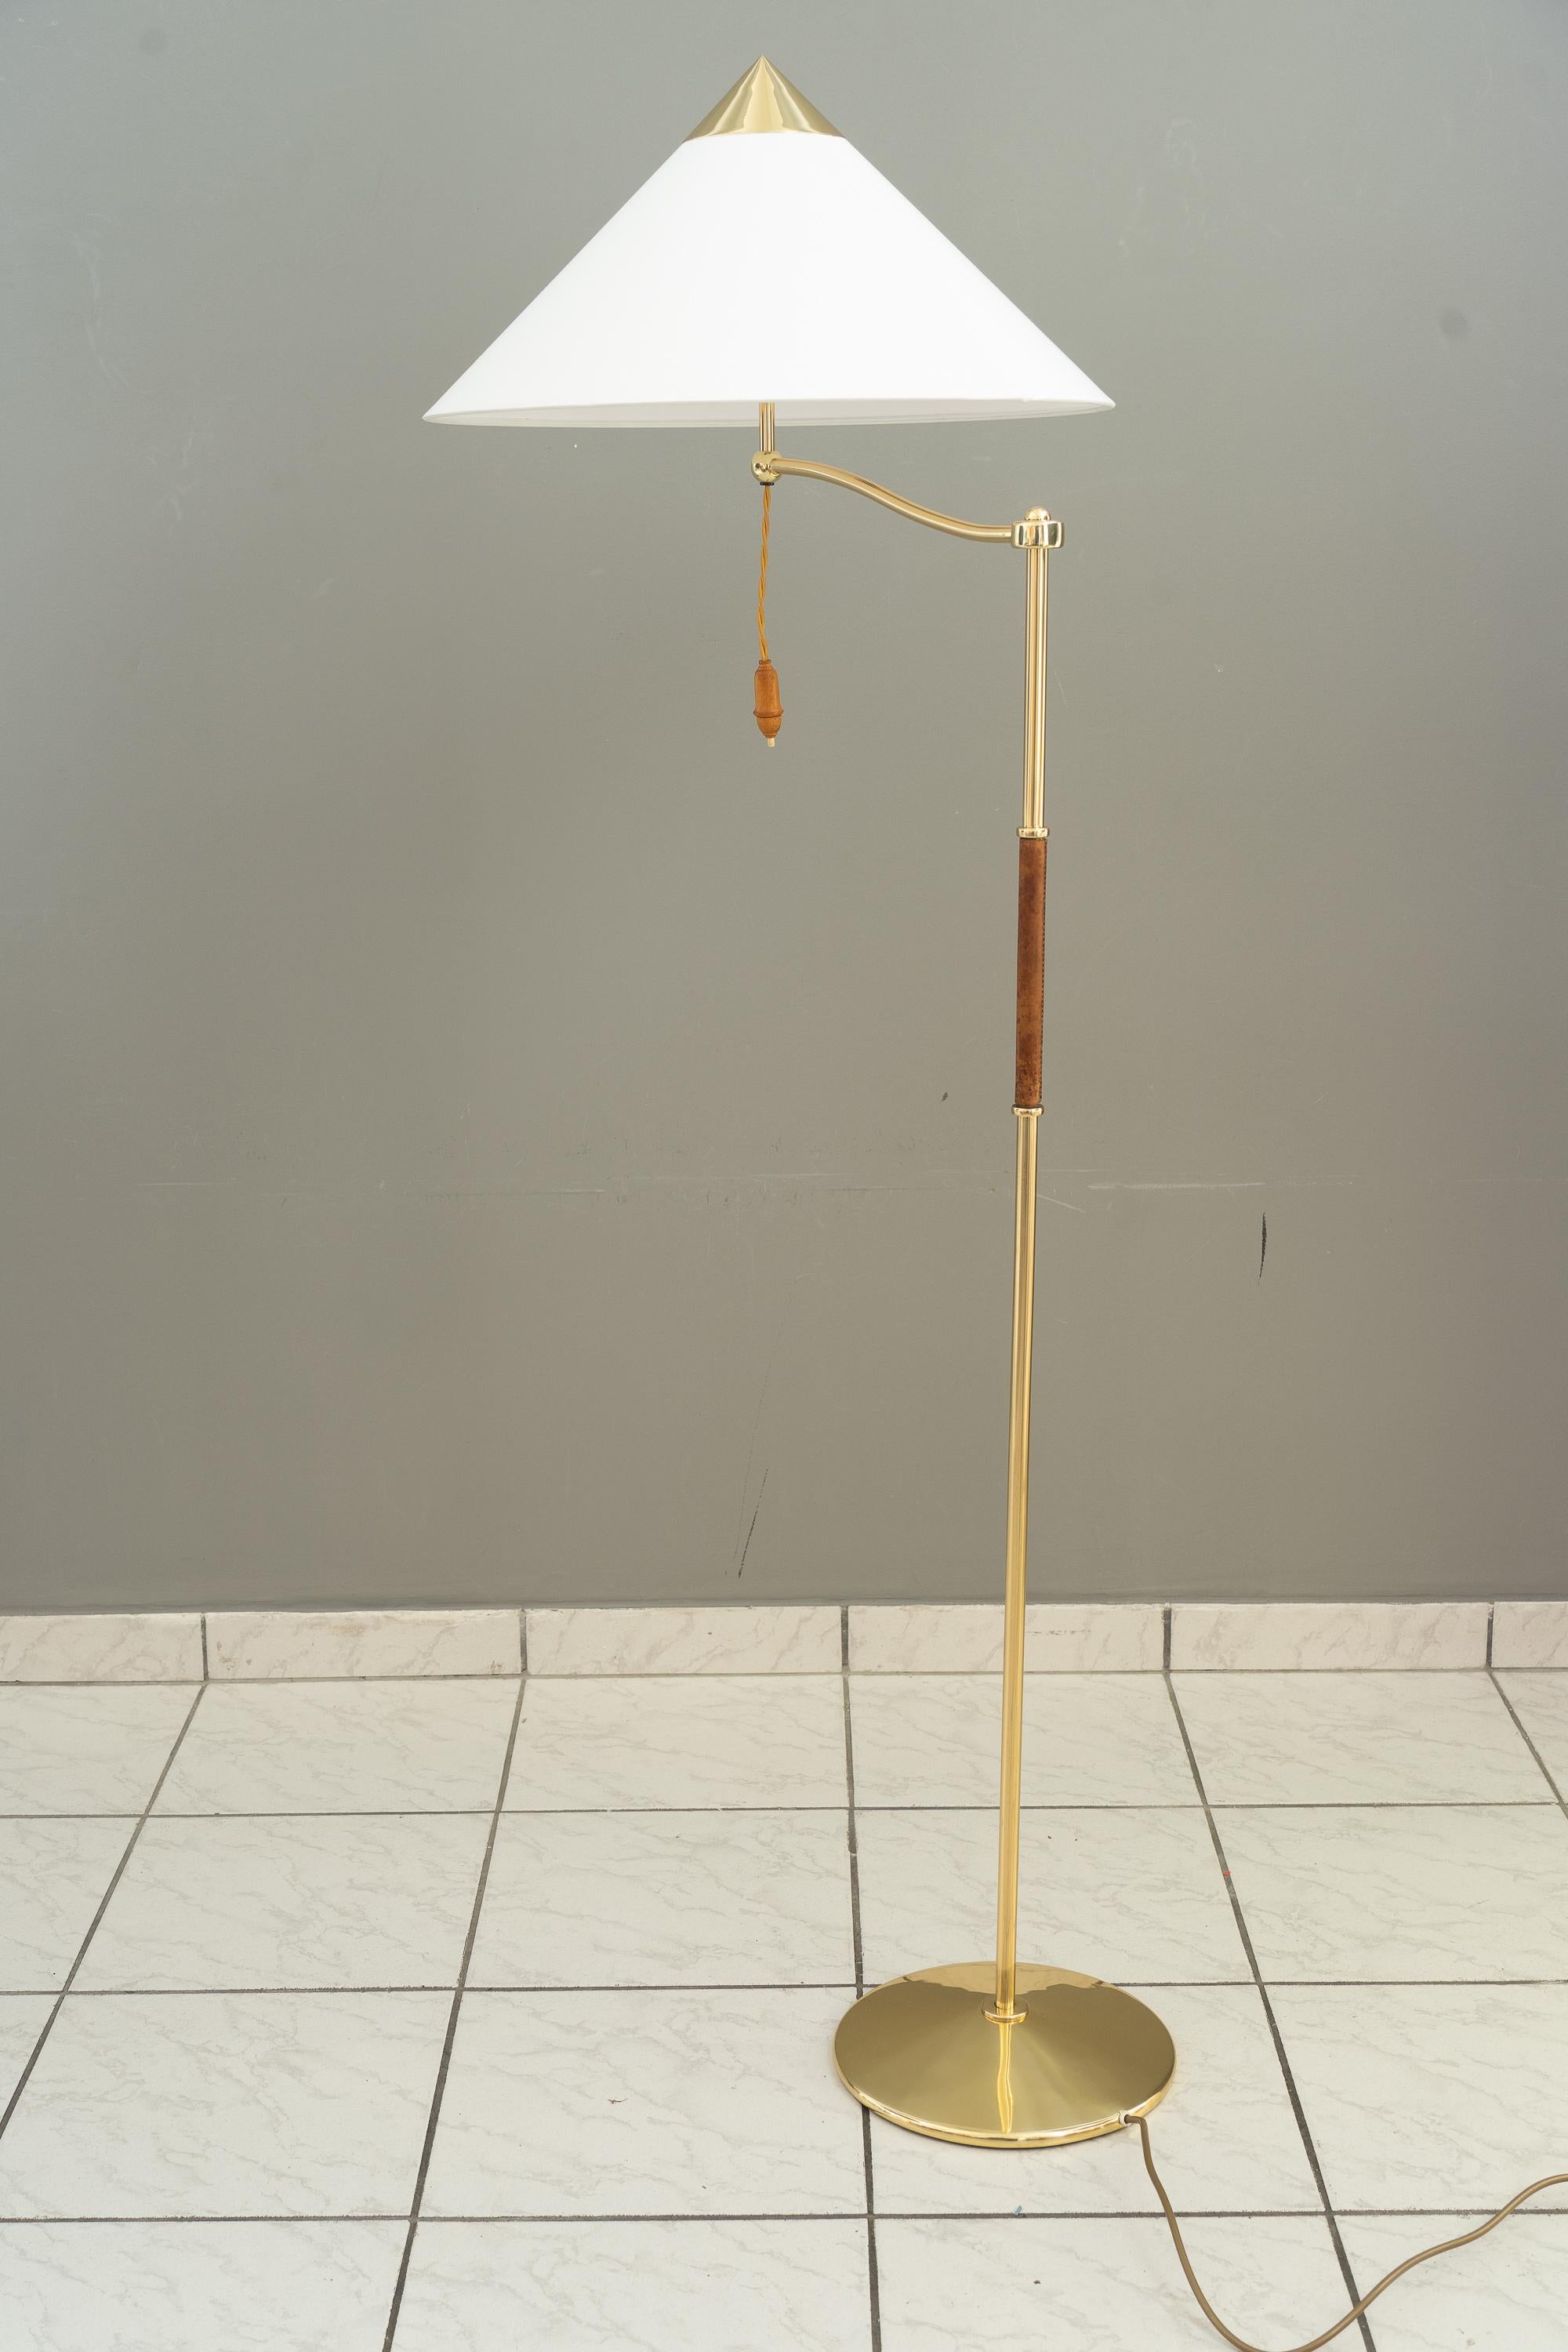 Rare Floor lamp by josef Frank for J.T.Kalmar around 1950s
Brass polished and stove enamelled
The fabric shade is replaced ( new )
Rewired ( new ).